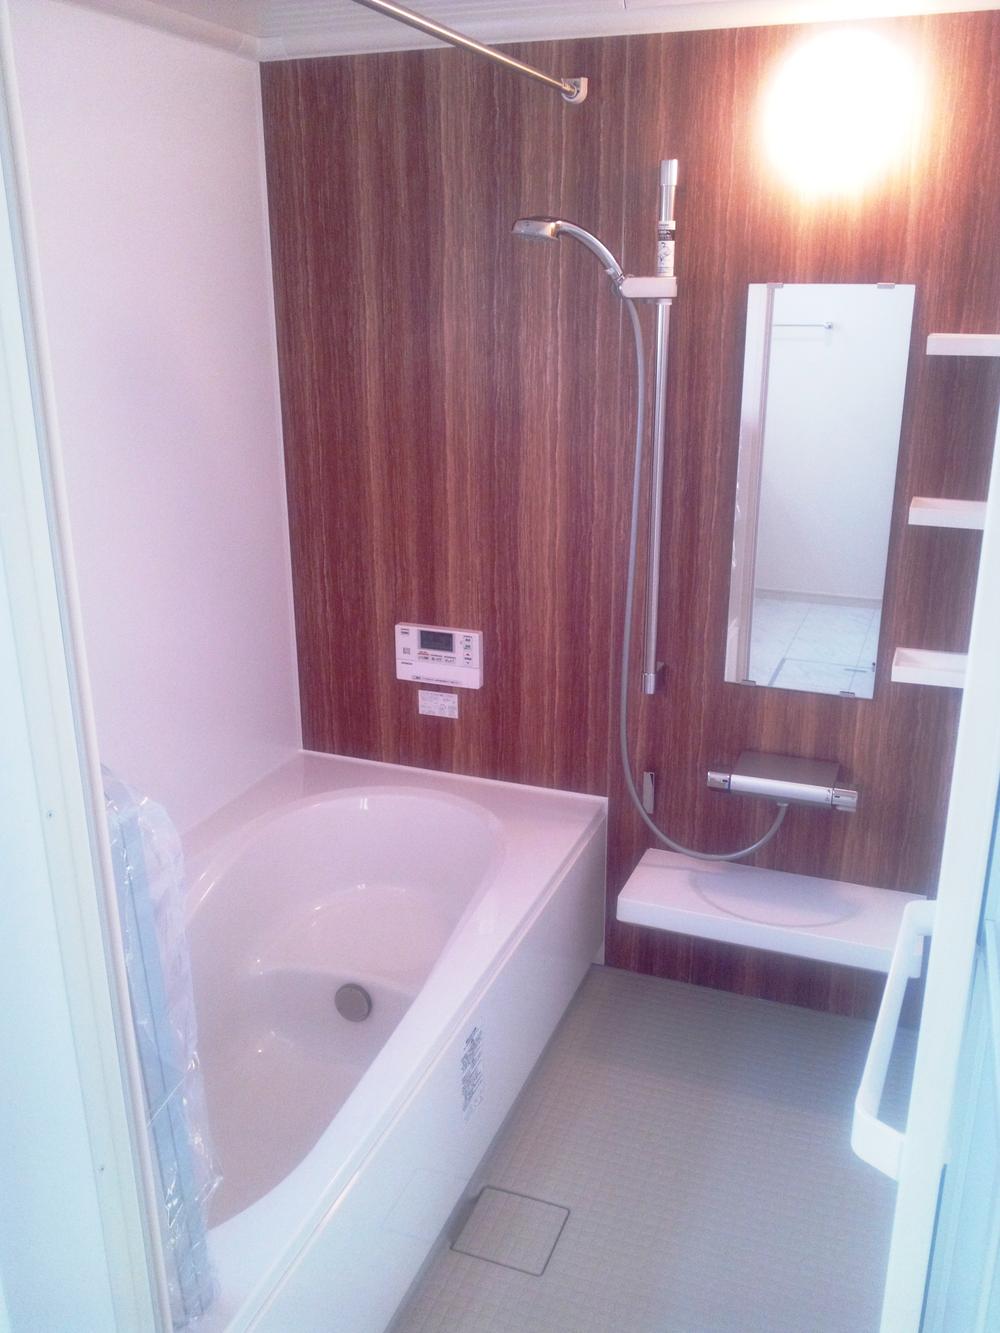 Bathroom. With bathroom ventilation drying heater. Convenient to dry in front of the heating and clothing bathing.